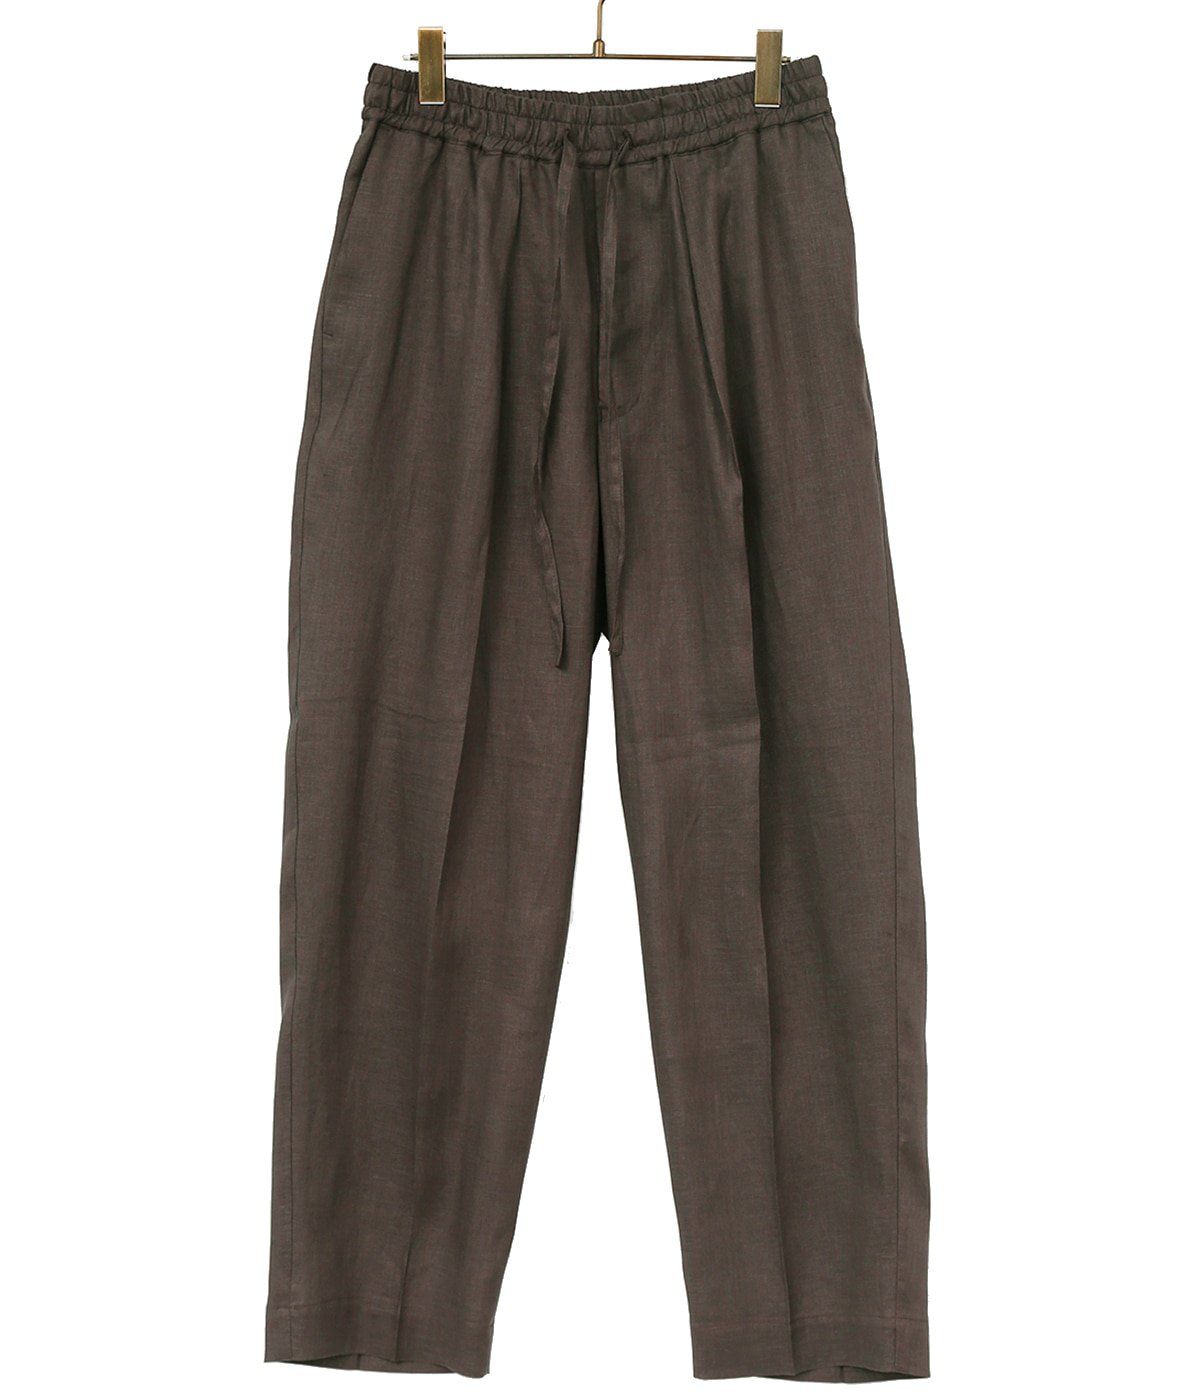 NEW CLASSIC FIT EASY TROUSERS - HEMP SHIRTING -